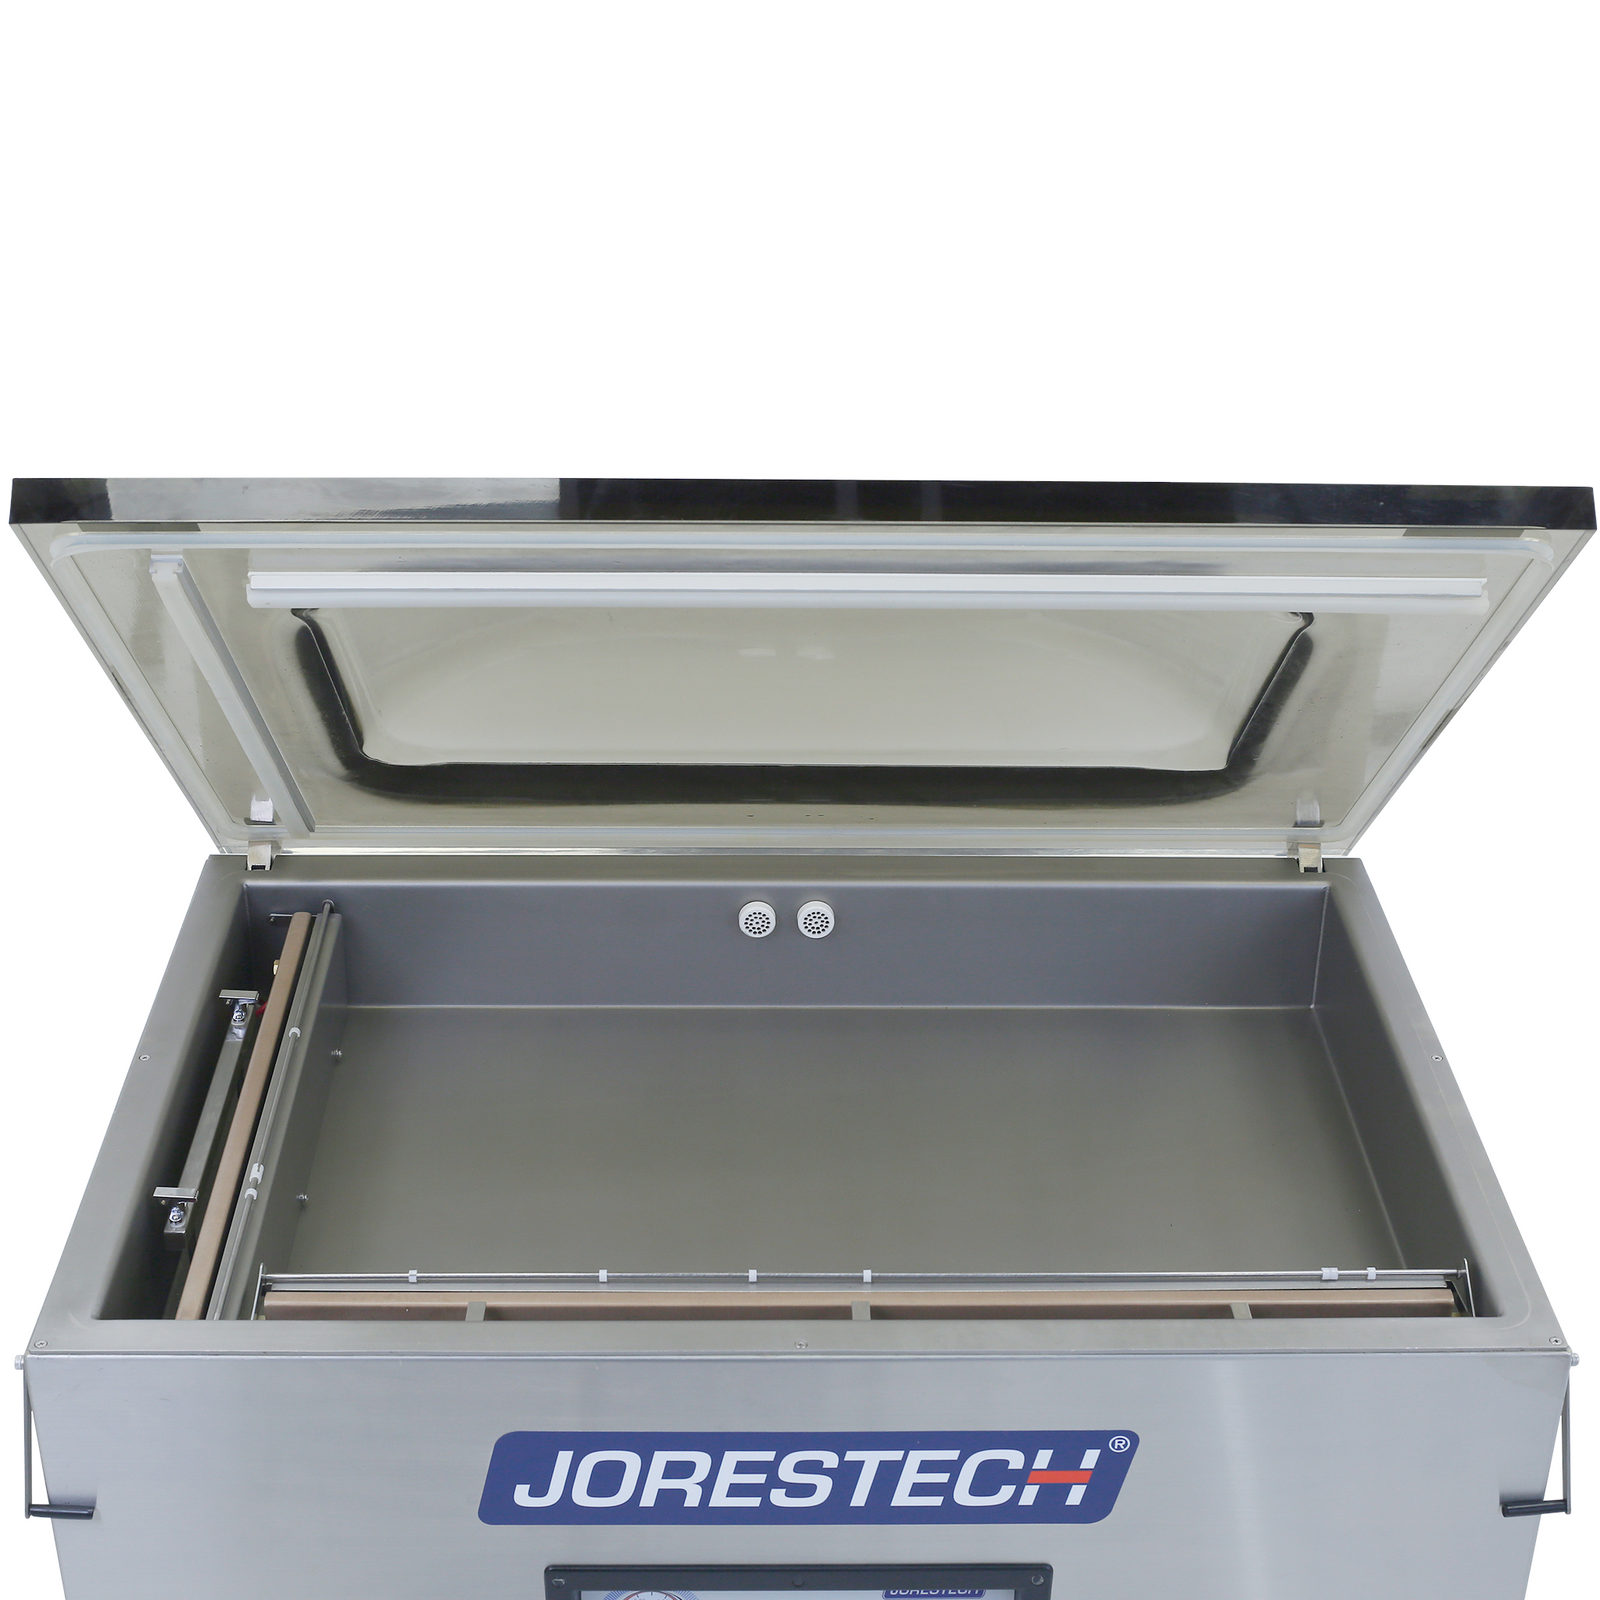 Chamber of the JORES TECHNOLOGIES® vacuum sealer with dual sealing elements.